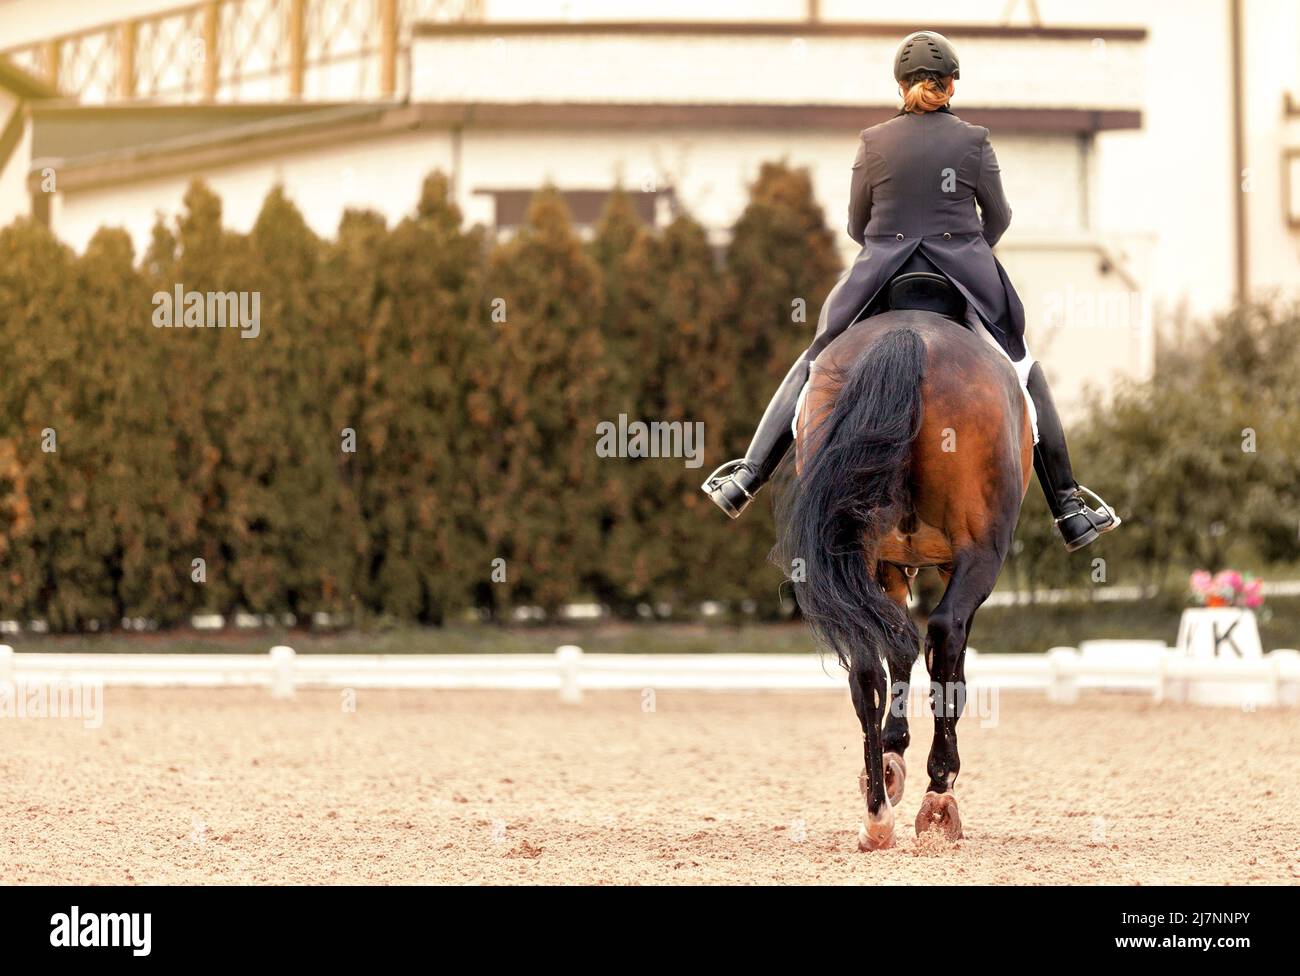 Classic Dressage horse. Equestrian sport. Equestrian competition show Stock Photo